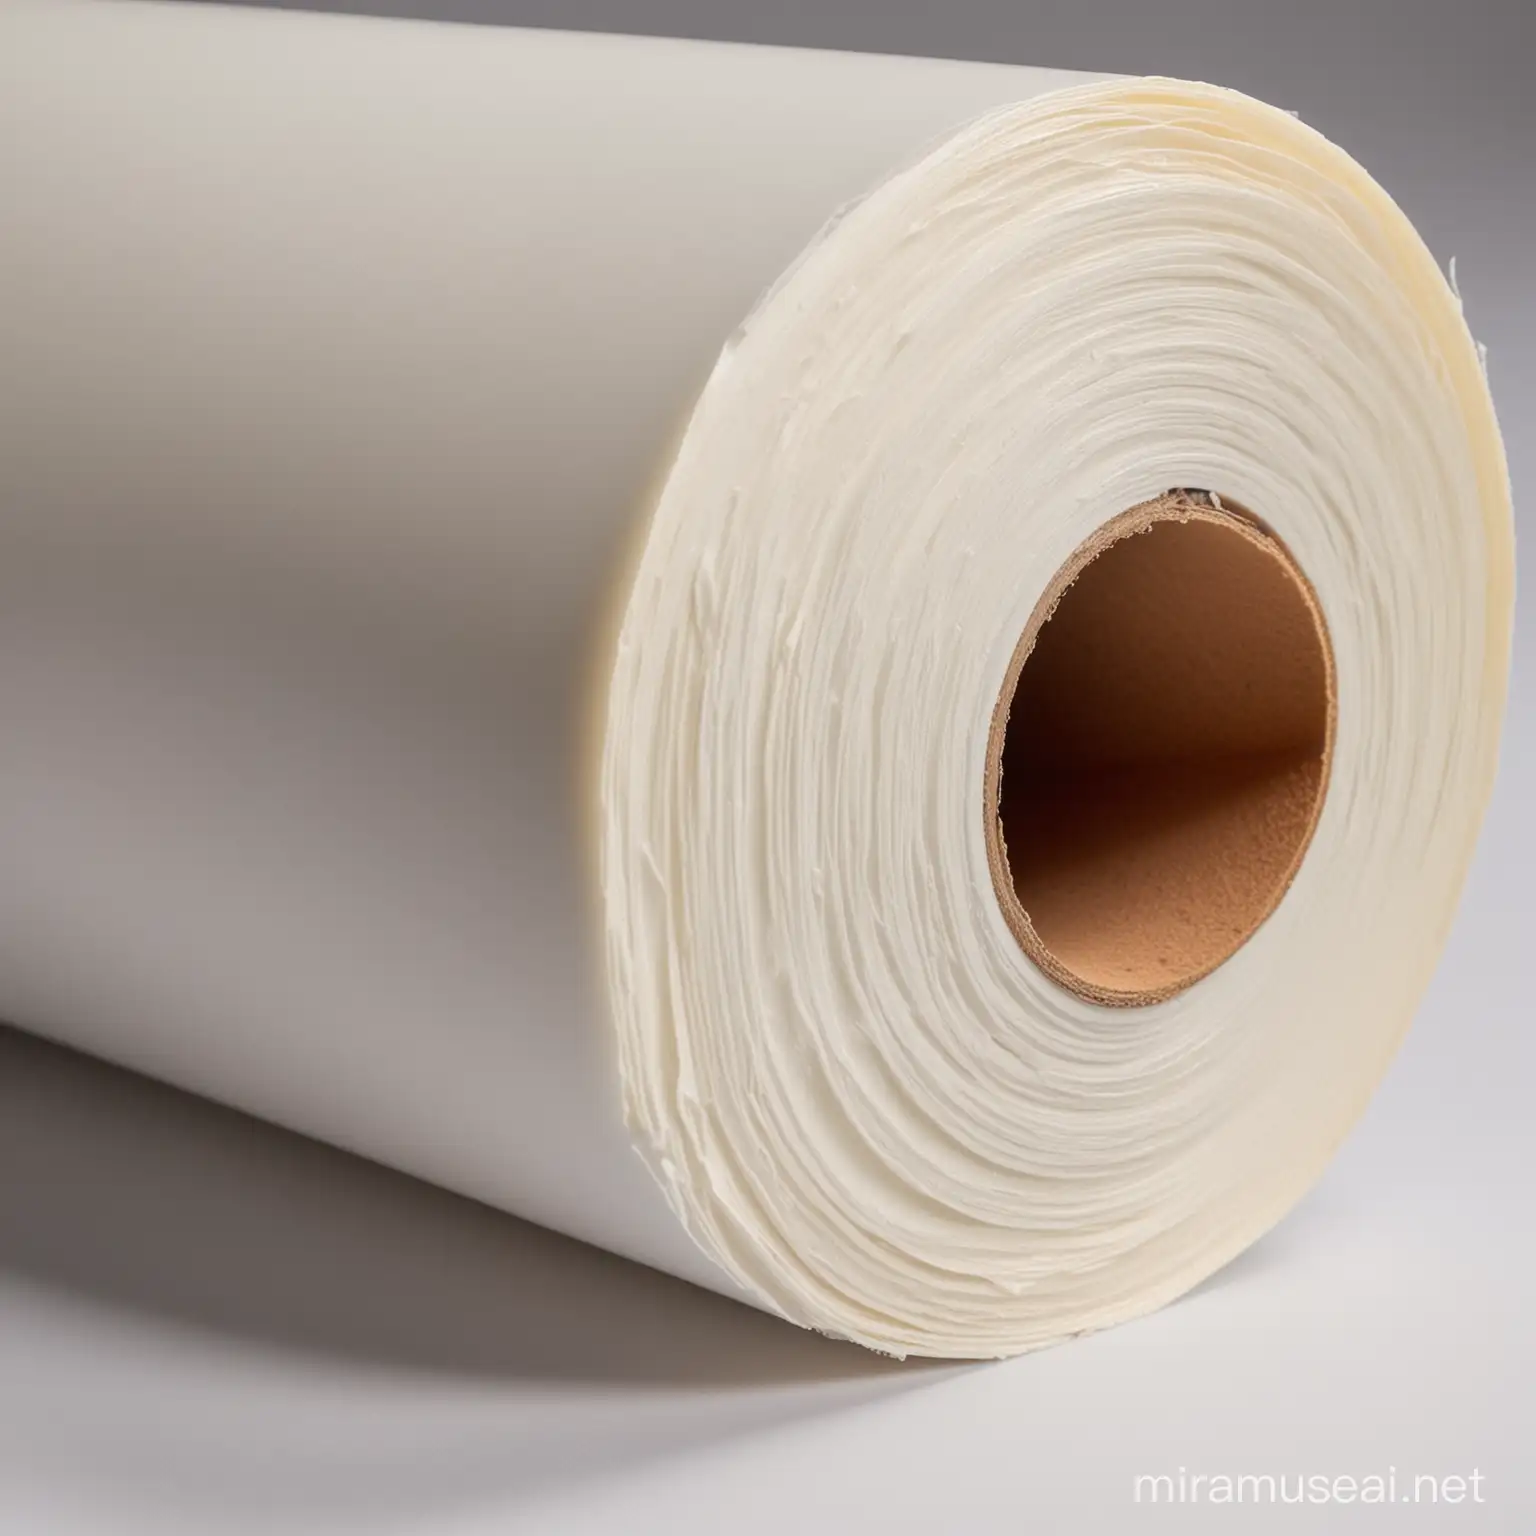 Neatly Wound 60Inch Wide PVC Roll with Core Realistic Photo